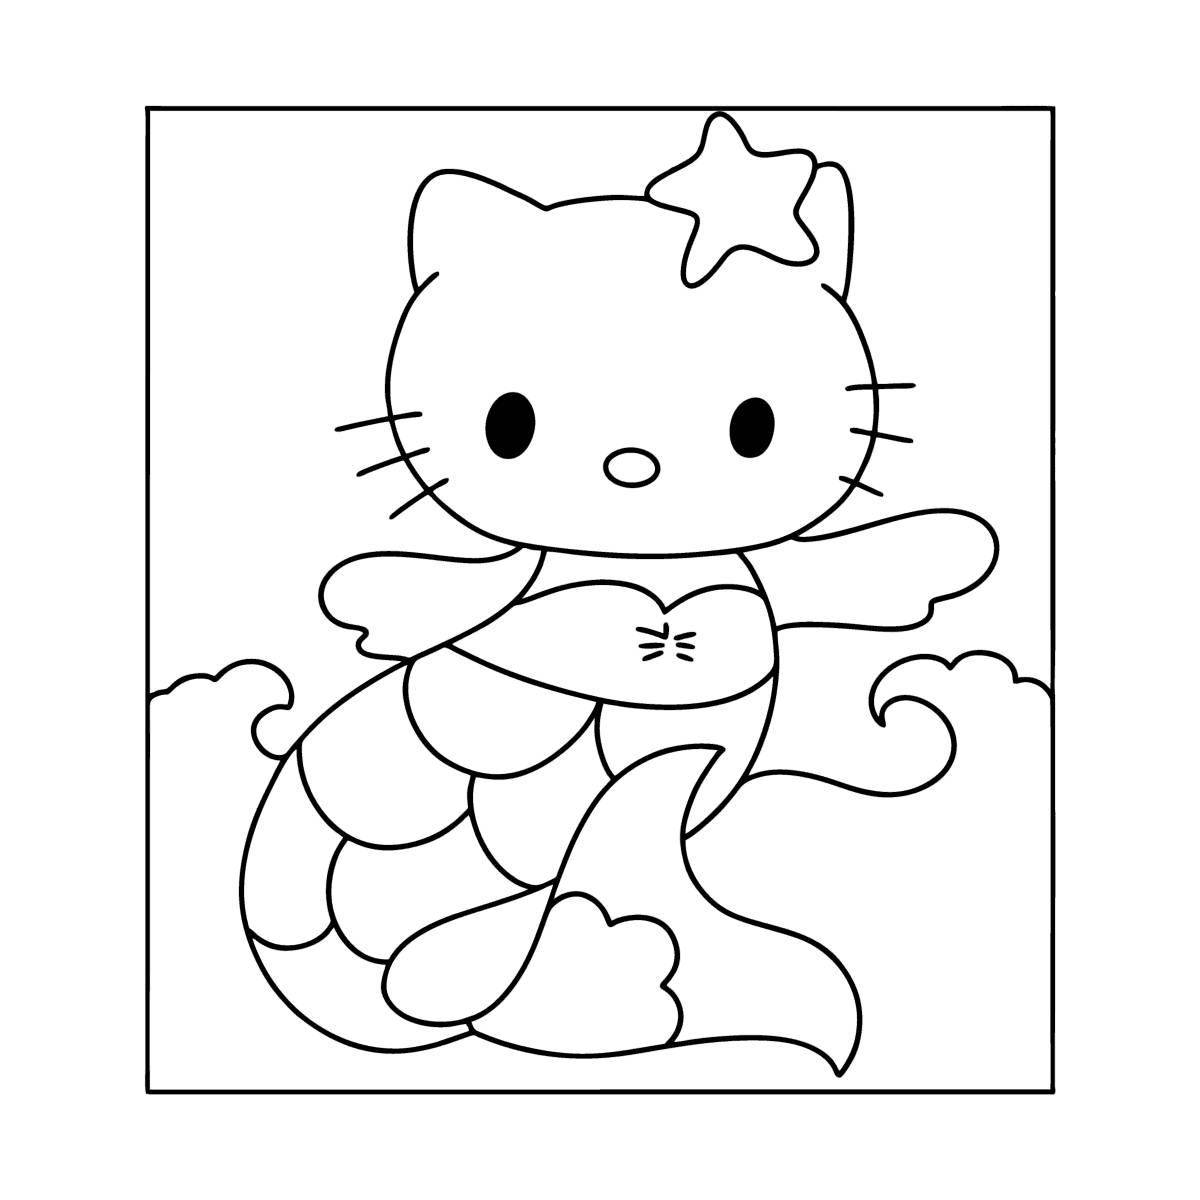 Bright hello kitty mermaid coloring page